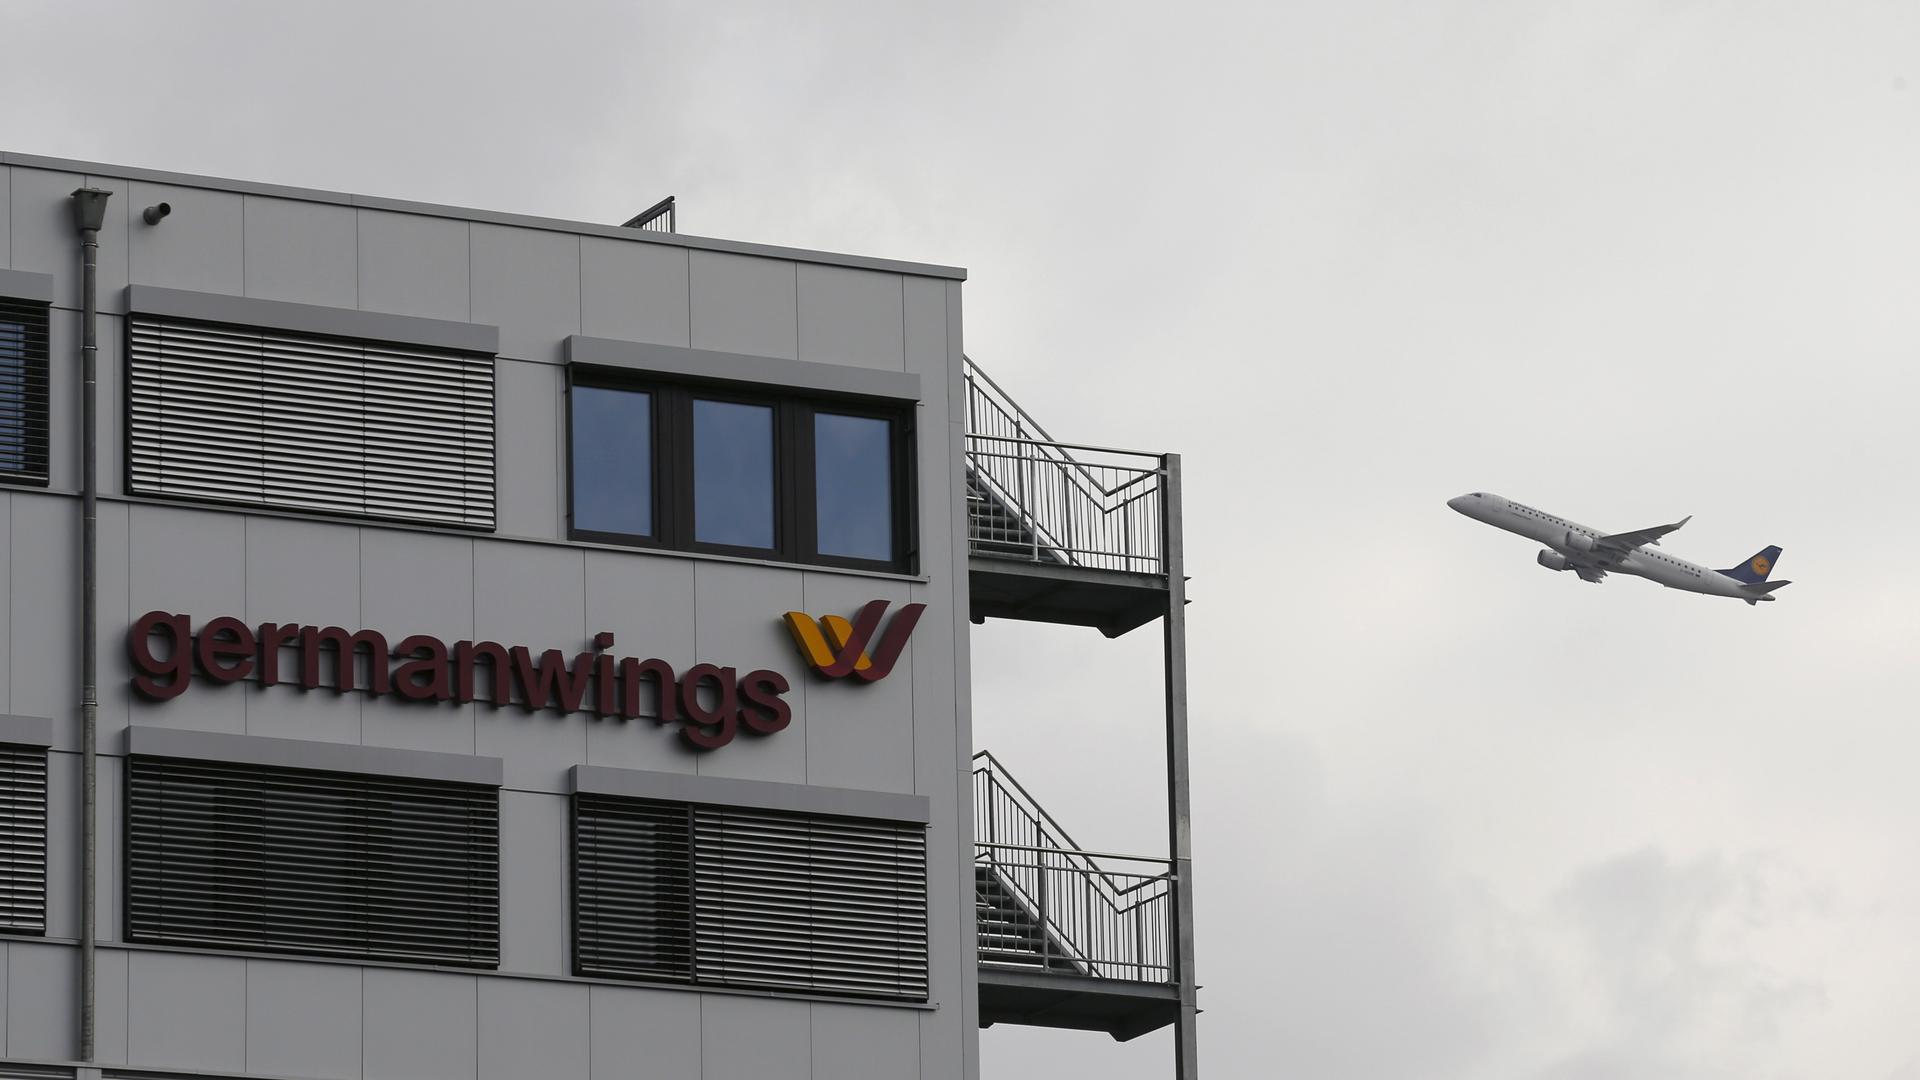 planeA Lufthansa aircraft flies past the headquarters of Germanwings during take-off from Cologne-Bonn airport.